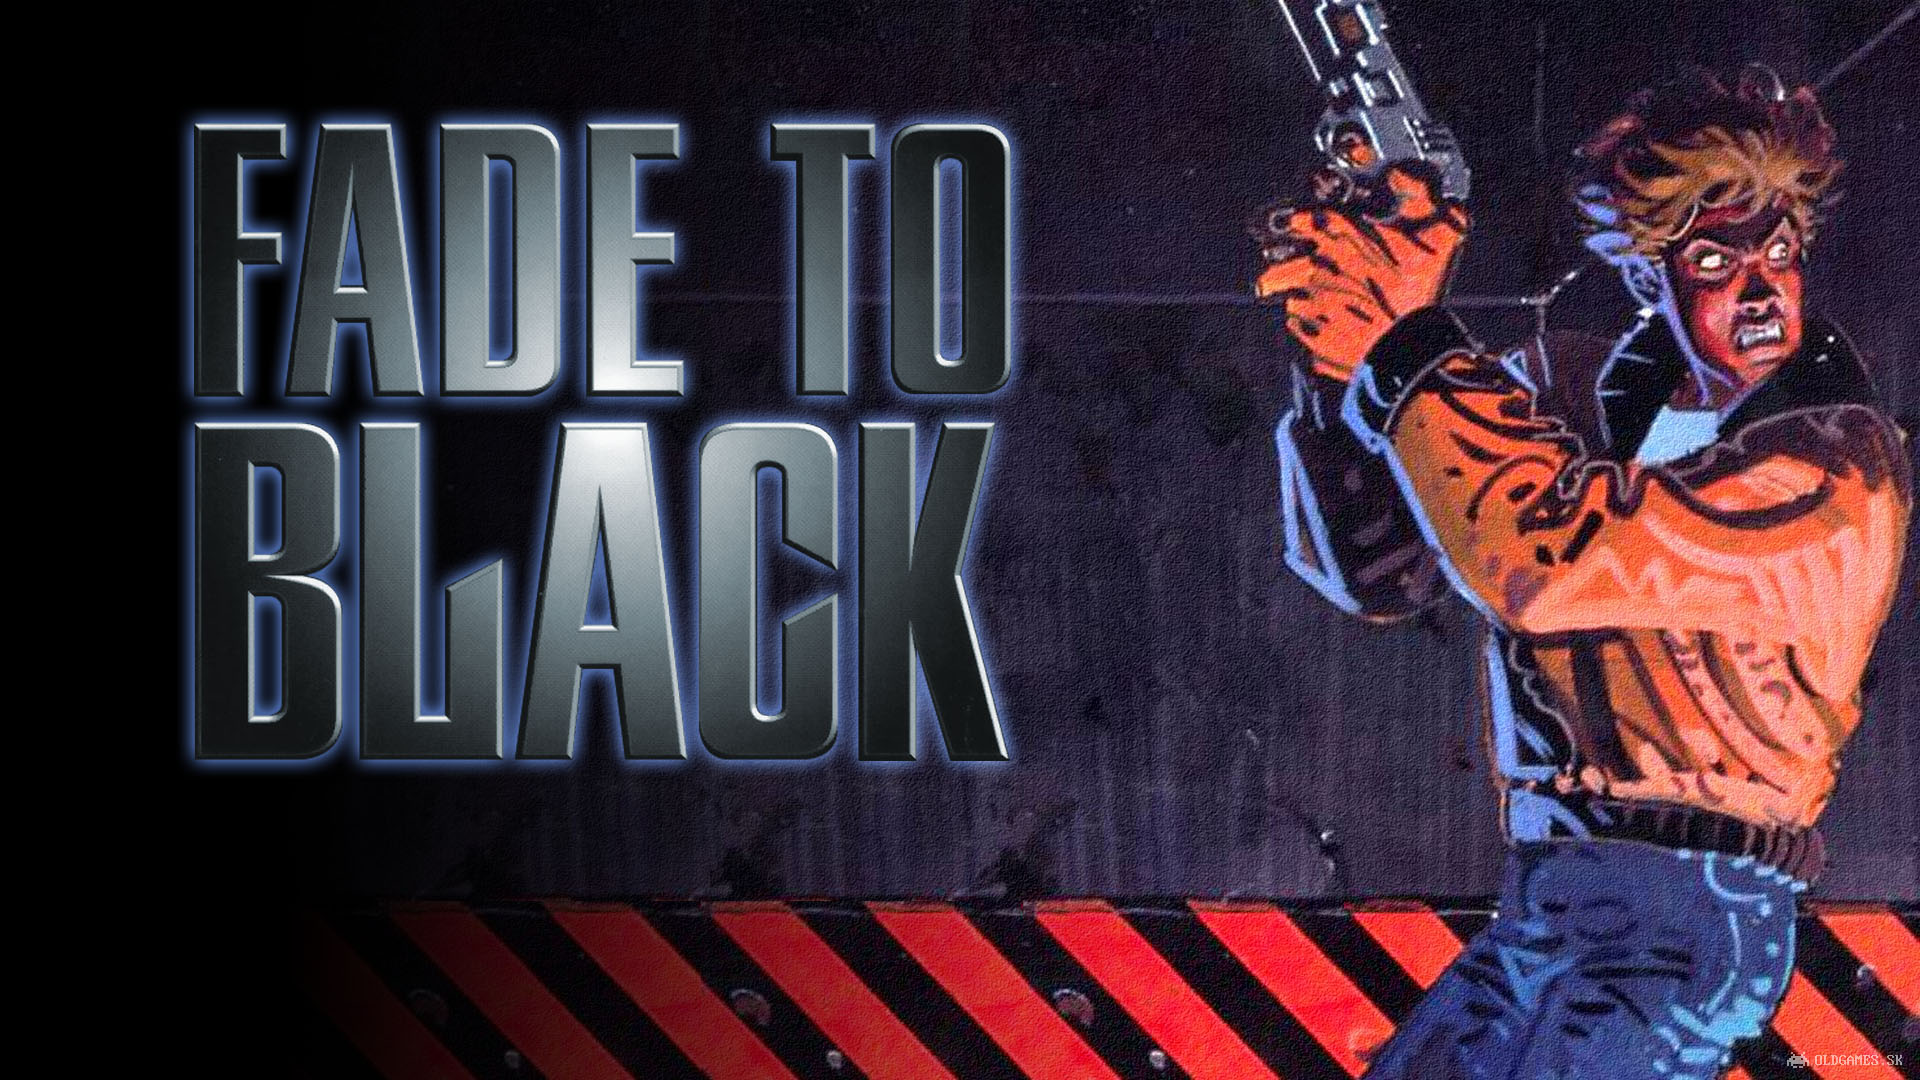 download fade to black remastered